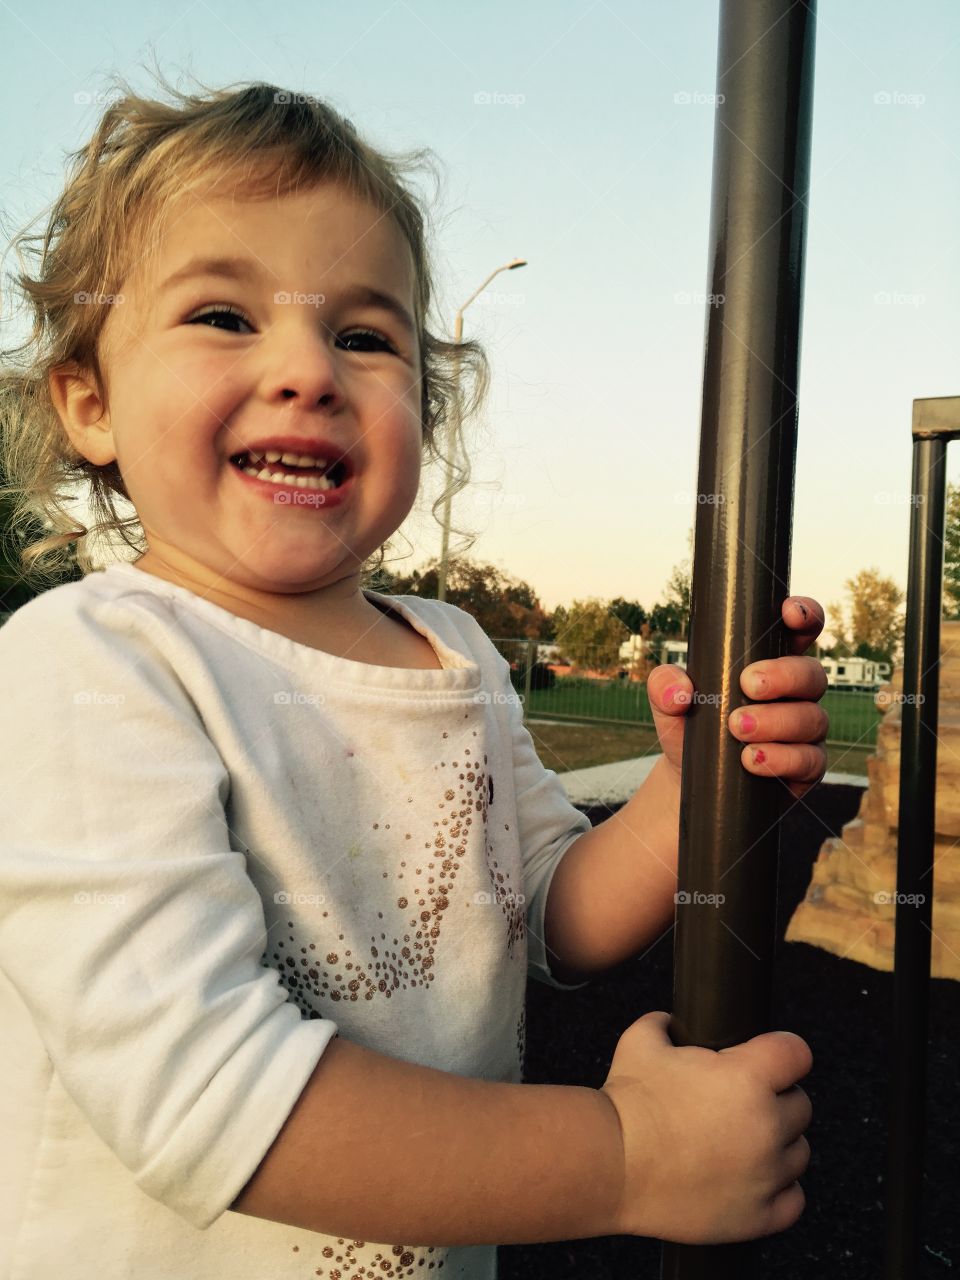 Happy baby at the park.